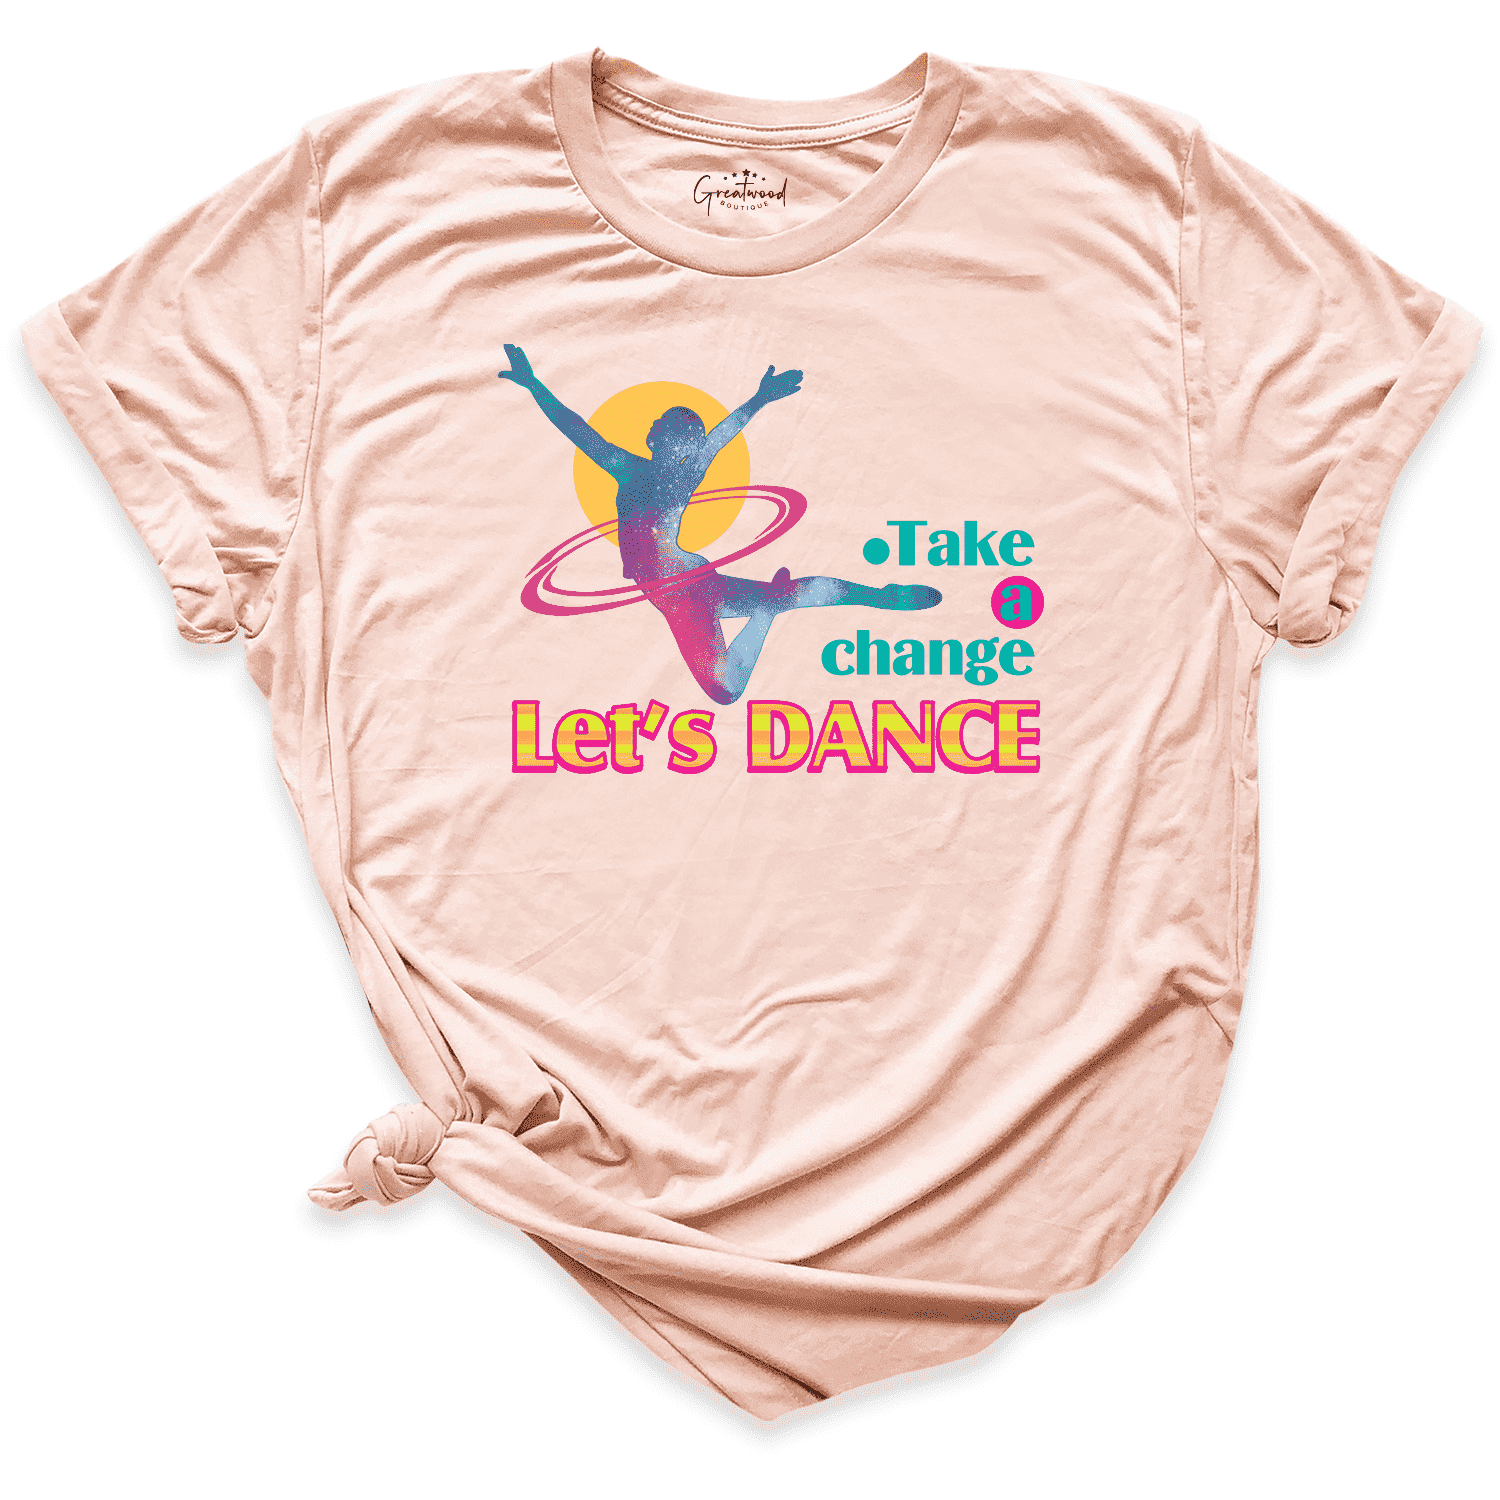 Let’s Dance Shirt Peach - Greatwood Boutigue